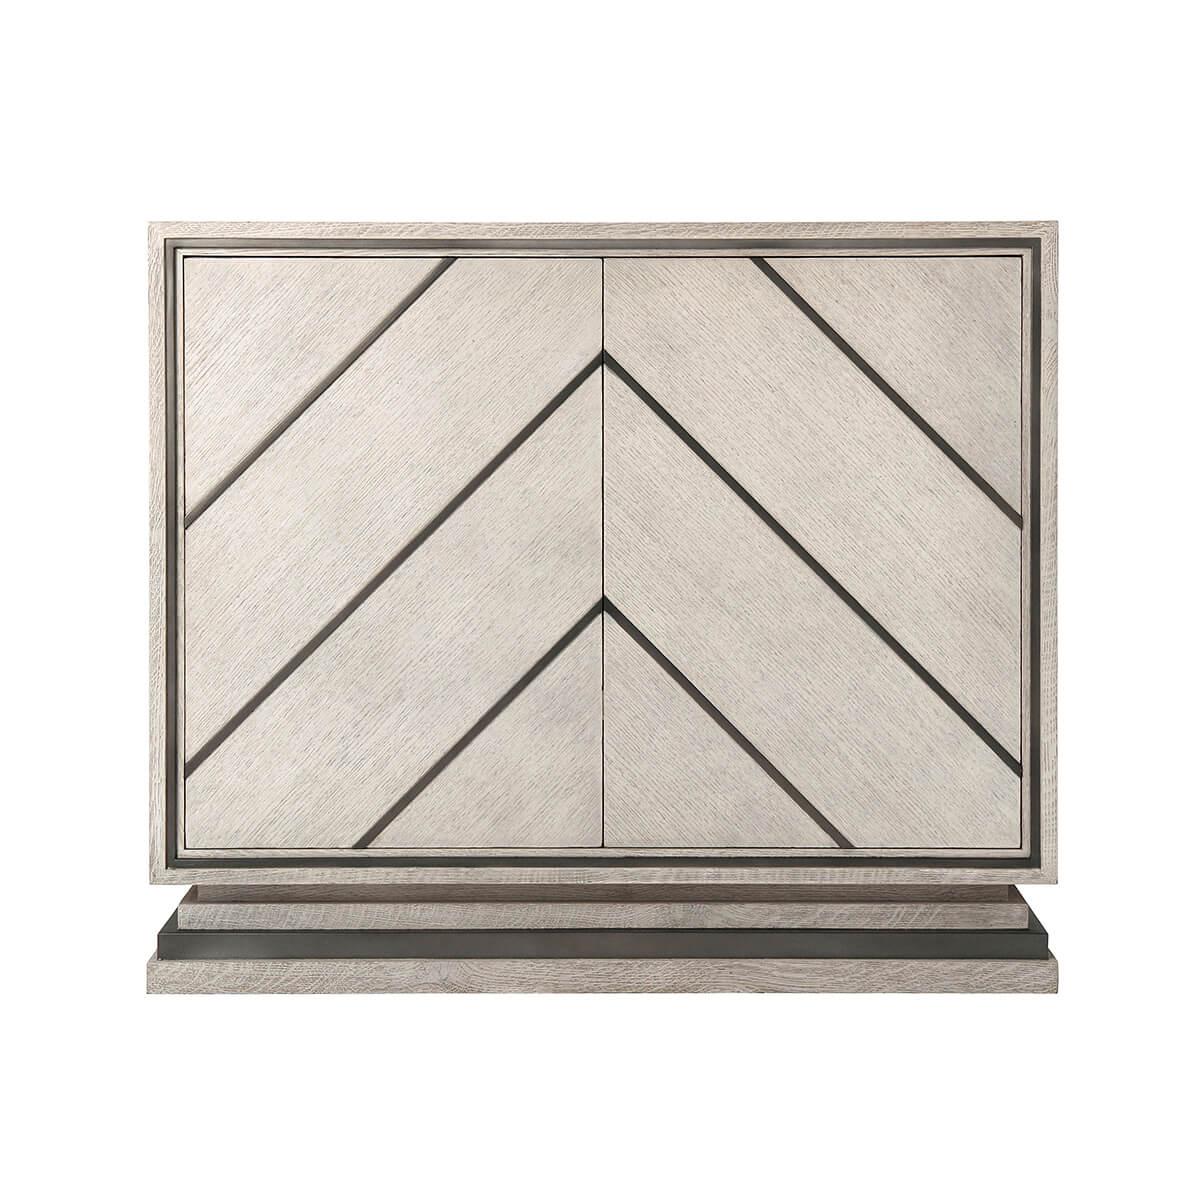 A modern chevron design cabinet with brushed quarter oak veneer in our Gowan finish, two doors with matte tungsten finish chevron overlays enclosing two adjustable shelves and raised on a stepped inset base. 

Dimensions: 40